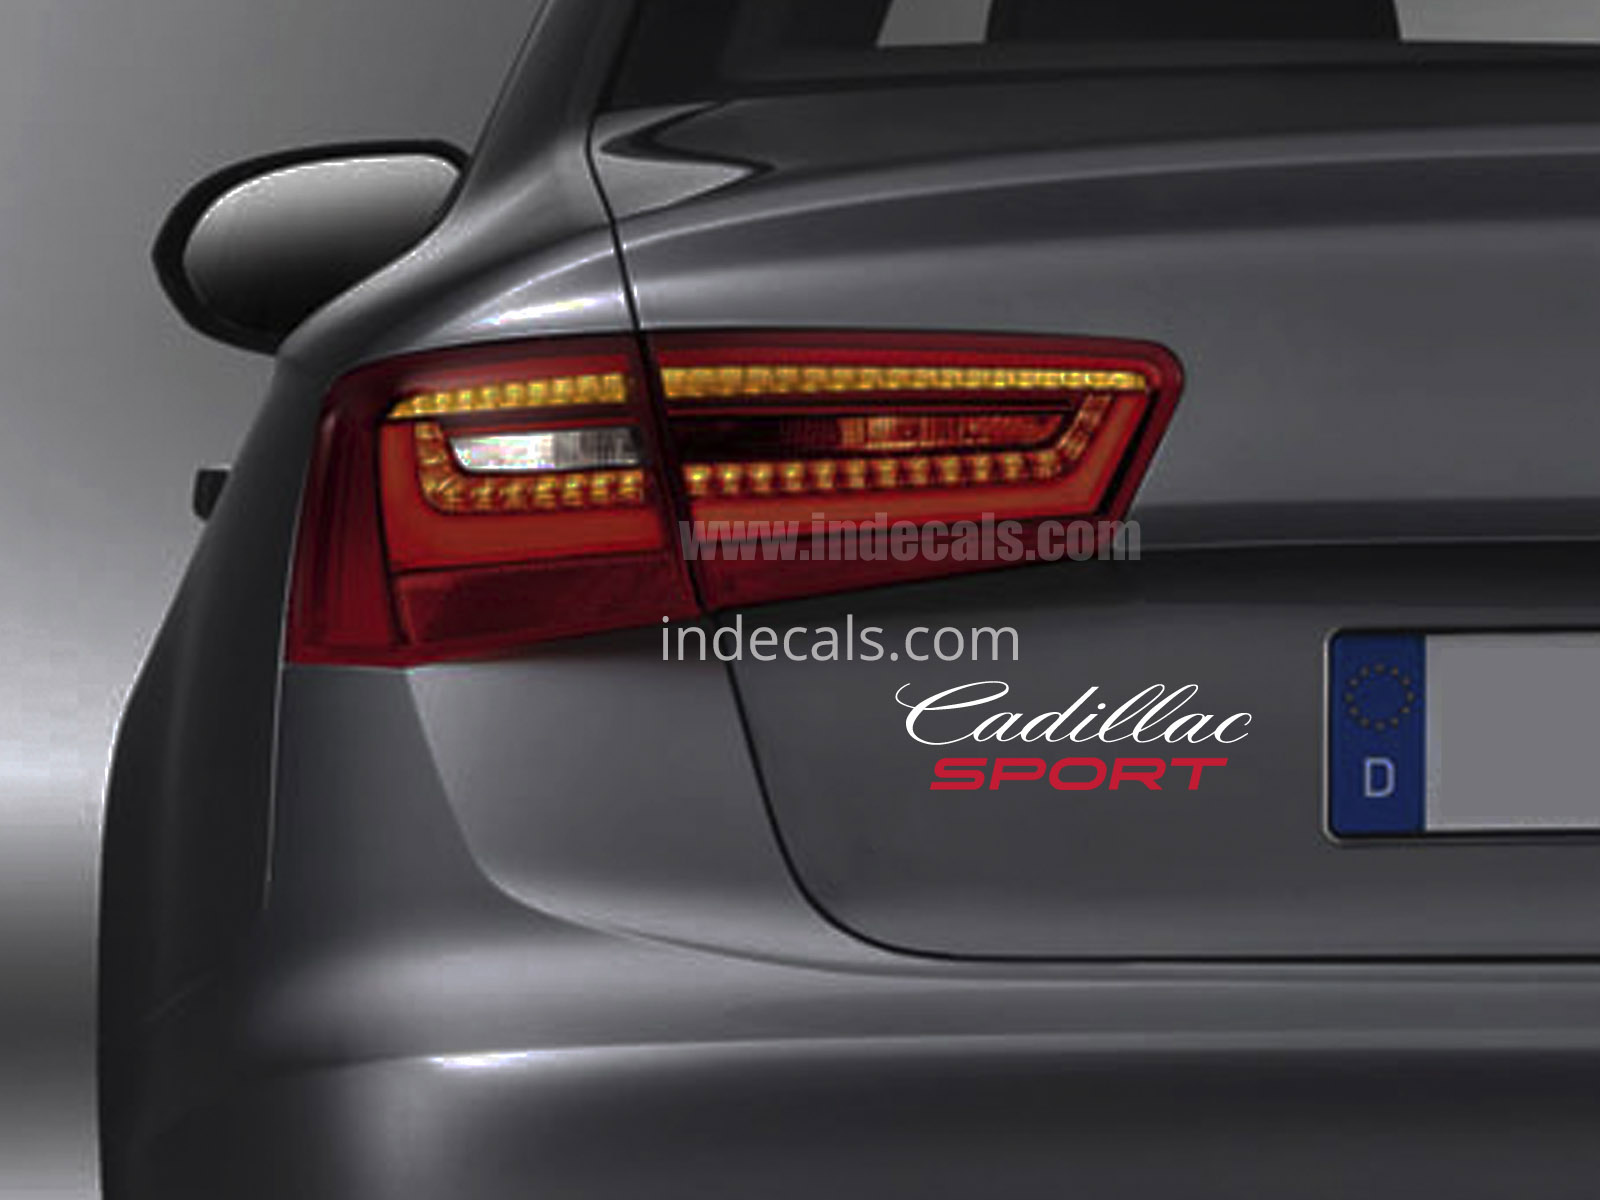 1 x Cadillac Sports Sticker for Trunk - White & Red